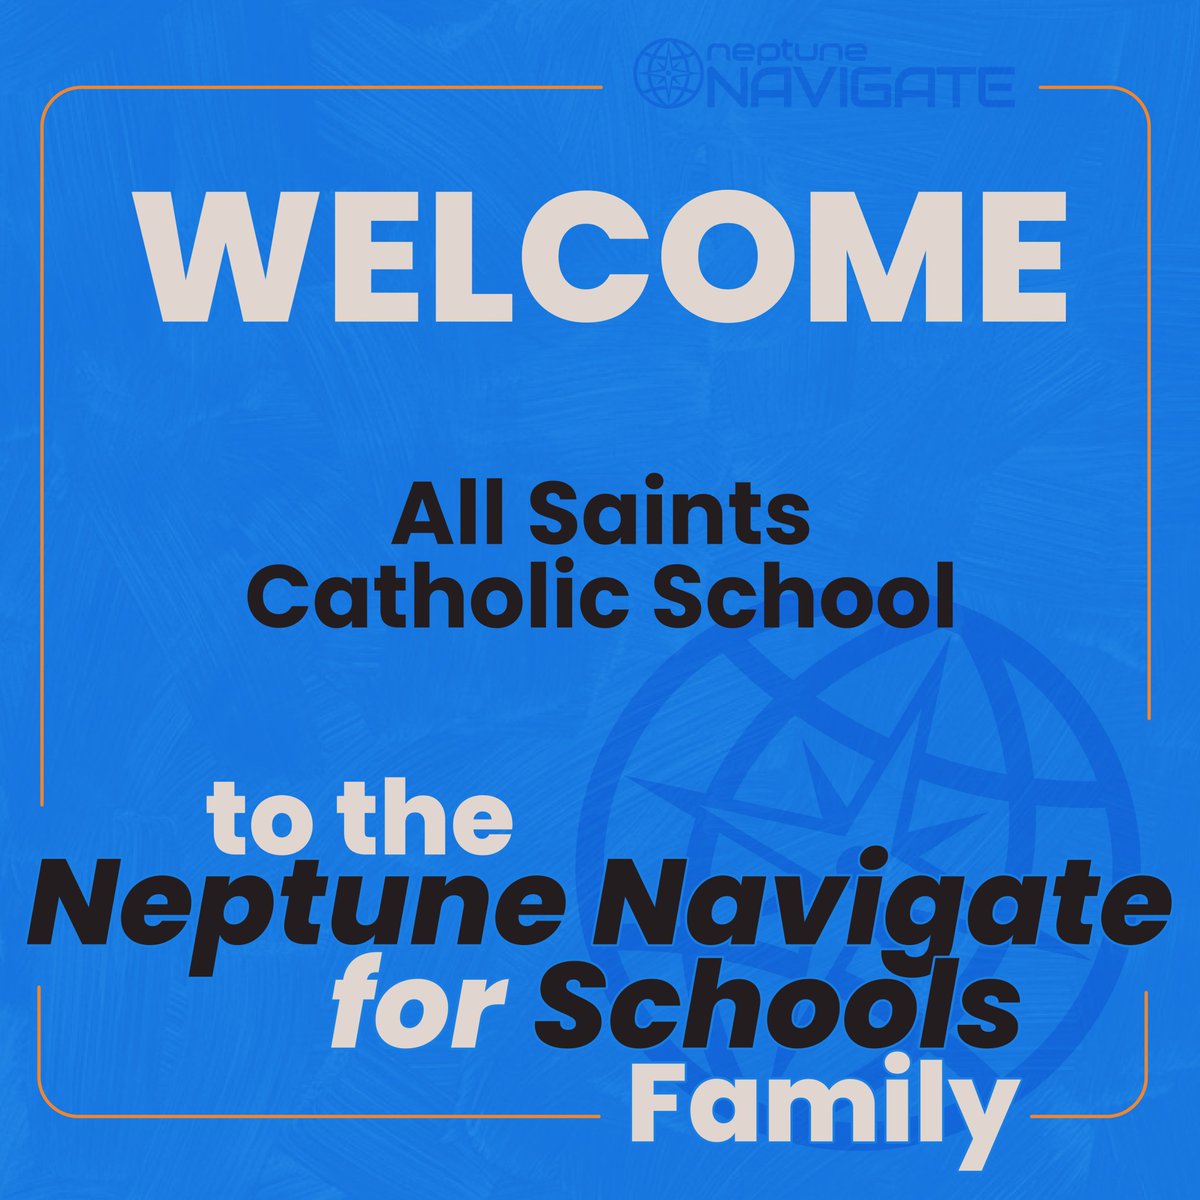 Our newest Neptune Navigate partner is All Saints Catholic School in Wisconsin! We’re eager to work together to teach your students how to be smart and stay safe online. Welcome, @ASCSCrusaders!